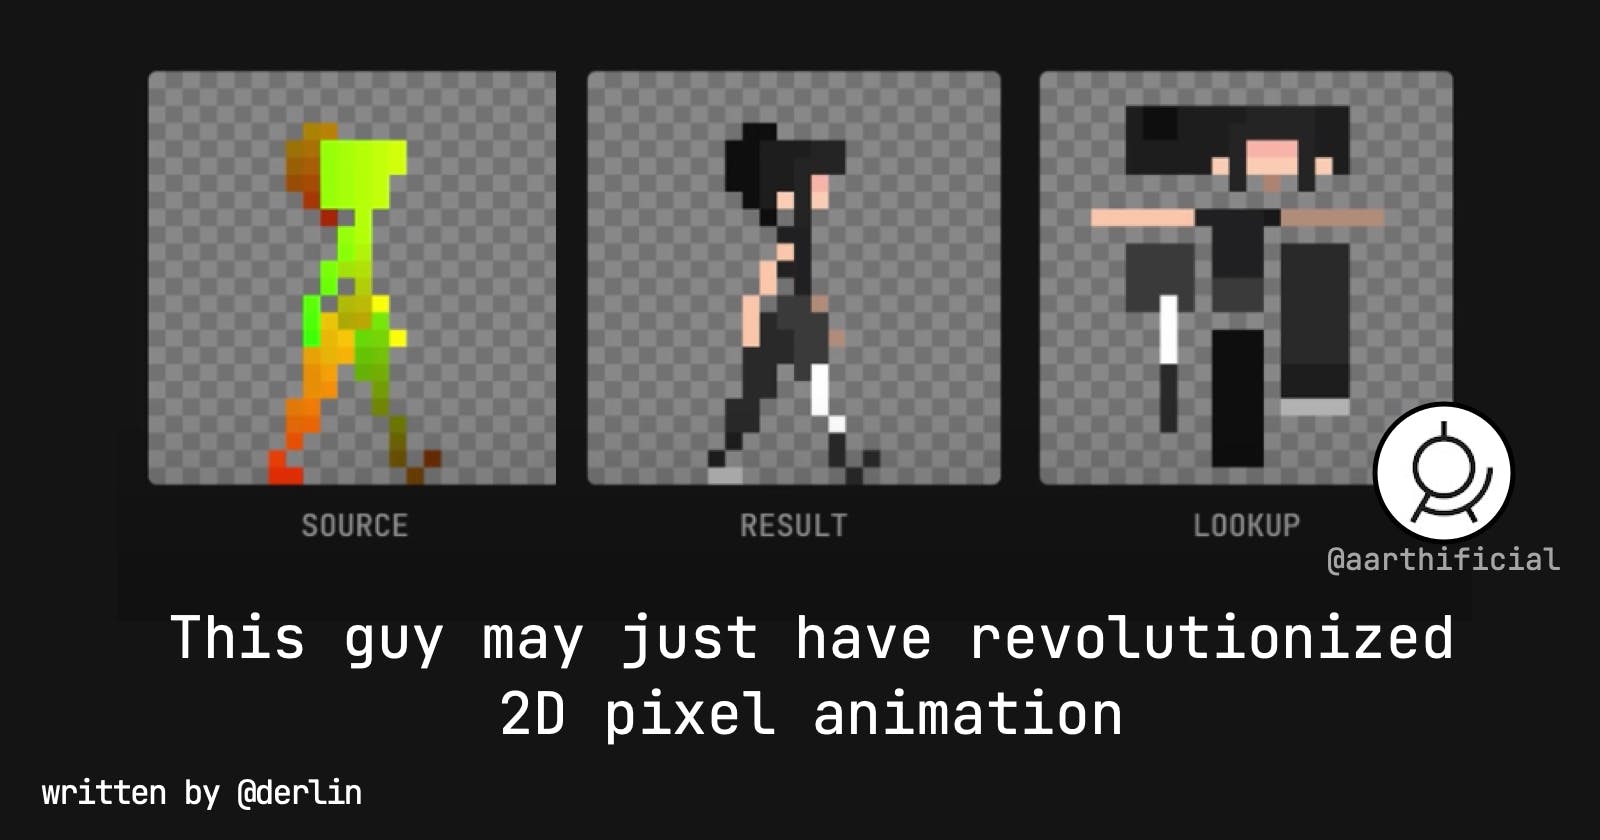 This guy may just have revolutionized 2D pixel animation